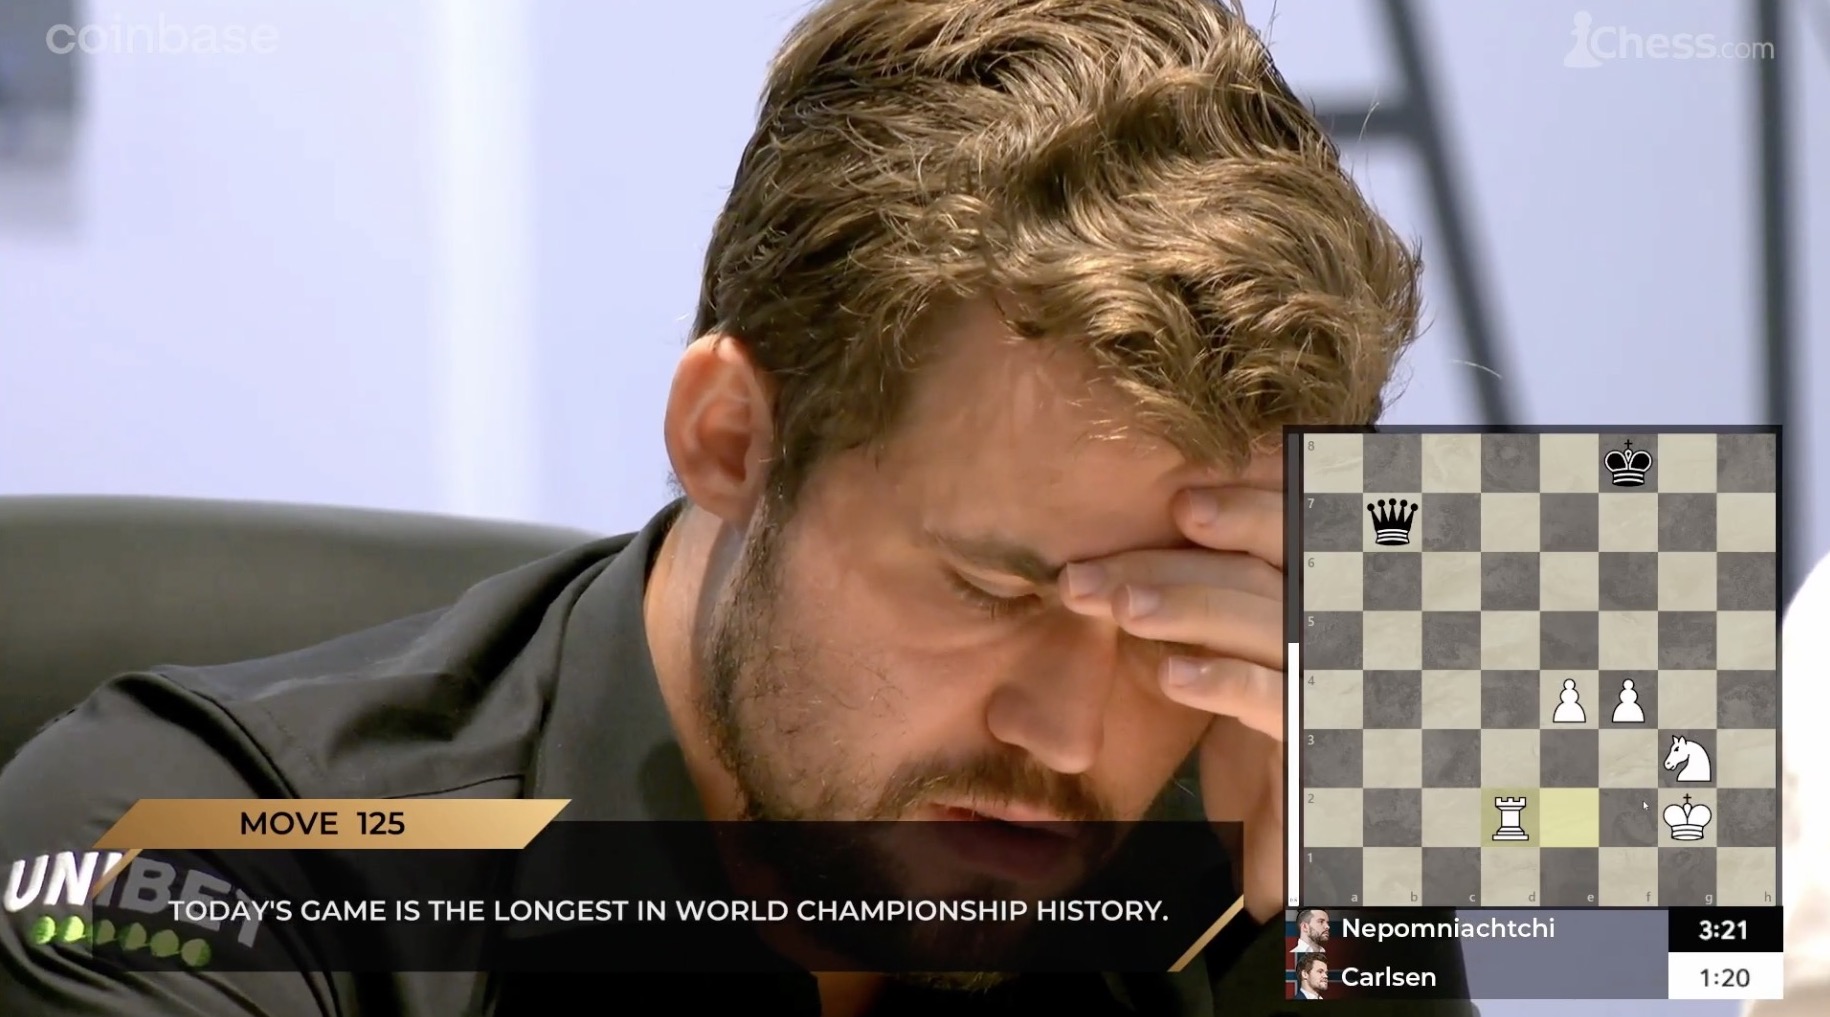 Carlsen going through it as the game crosses over into history.